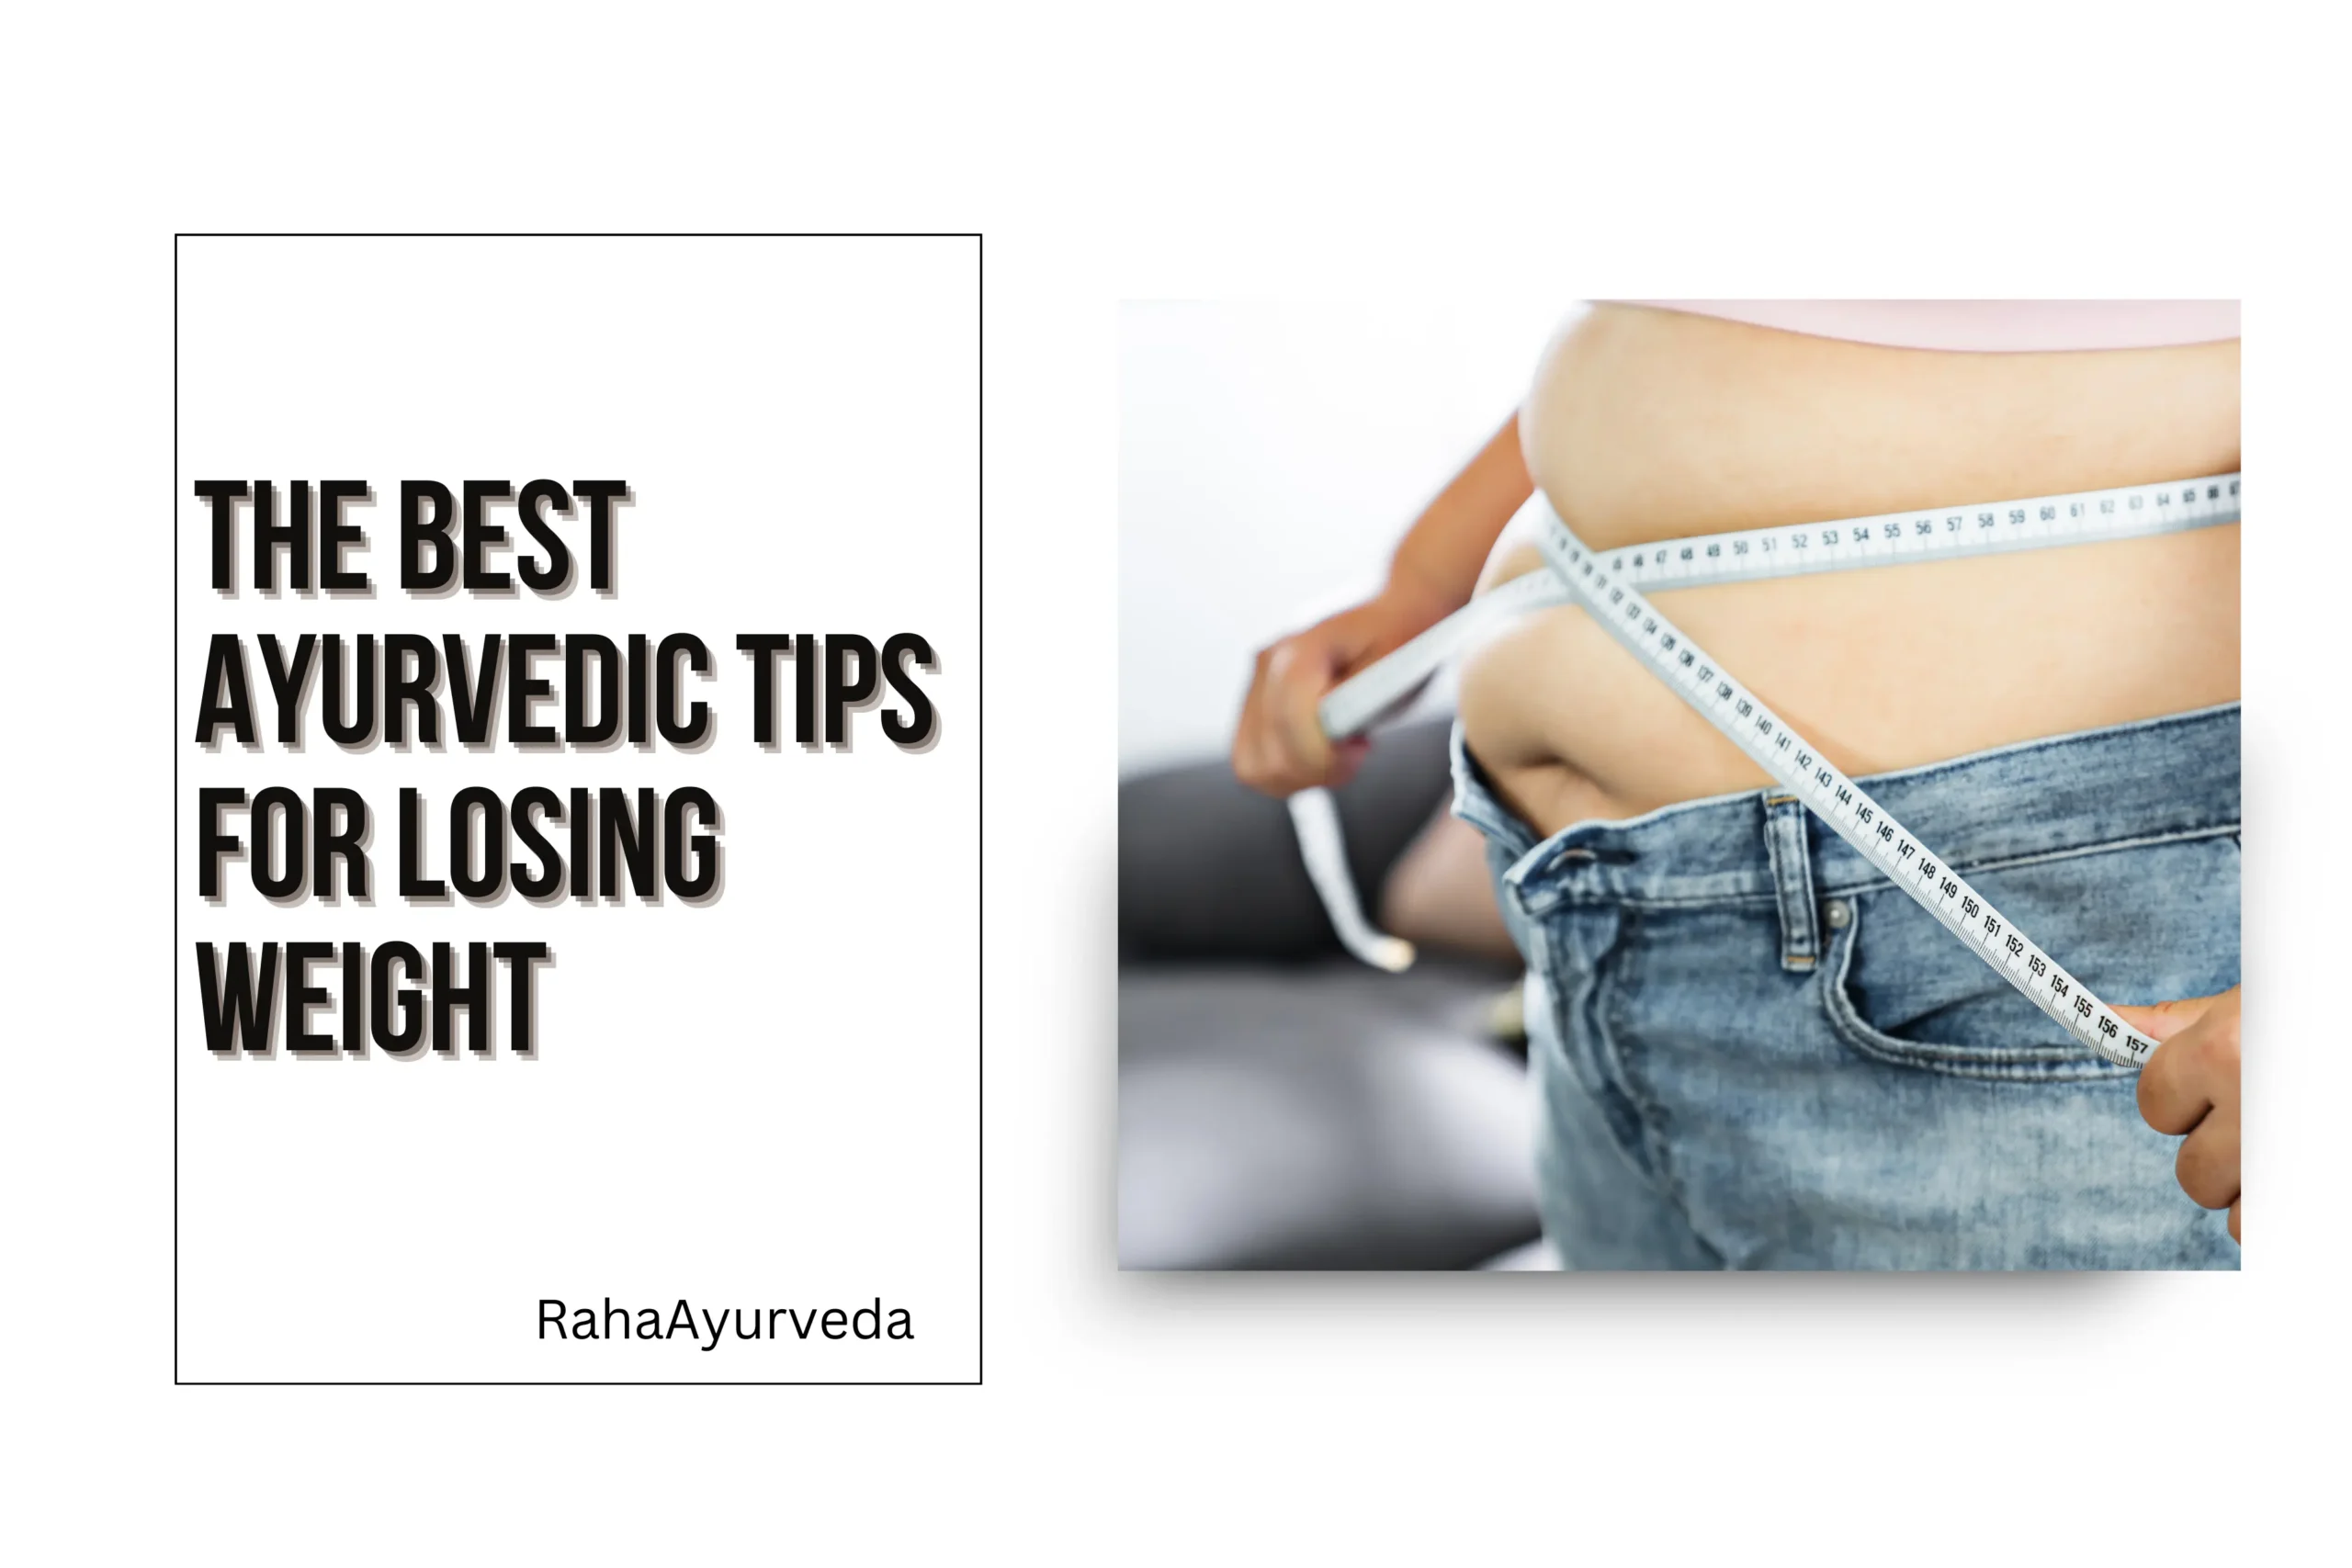 The Best Ayurvedic Tips For Losing Weight